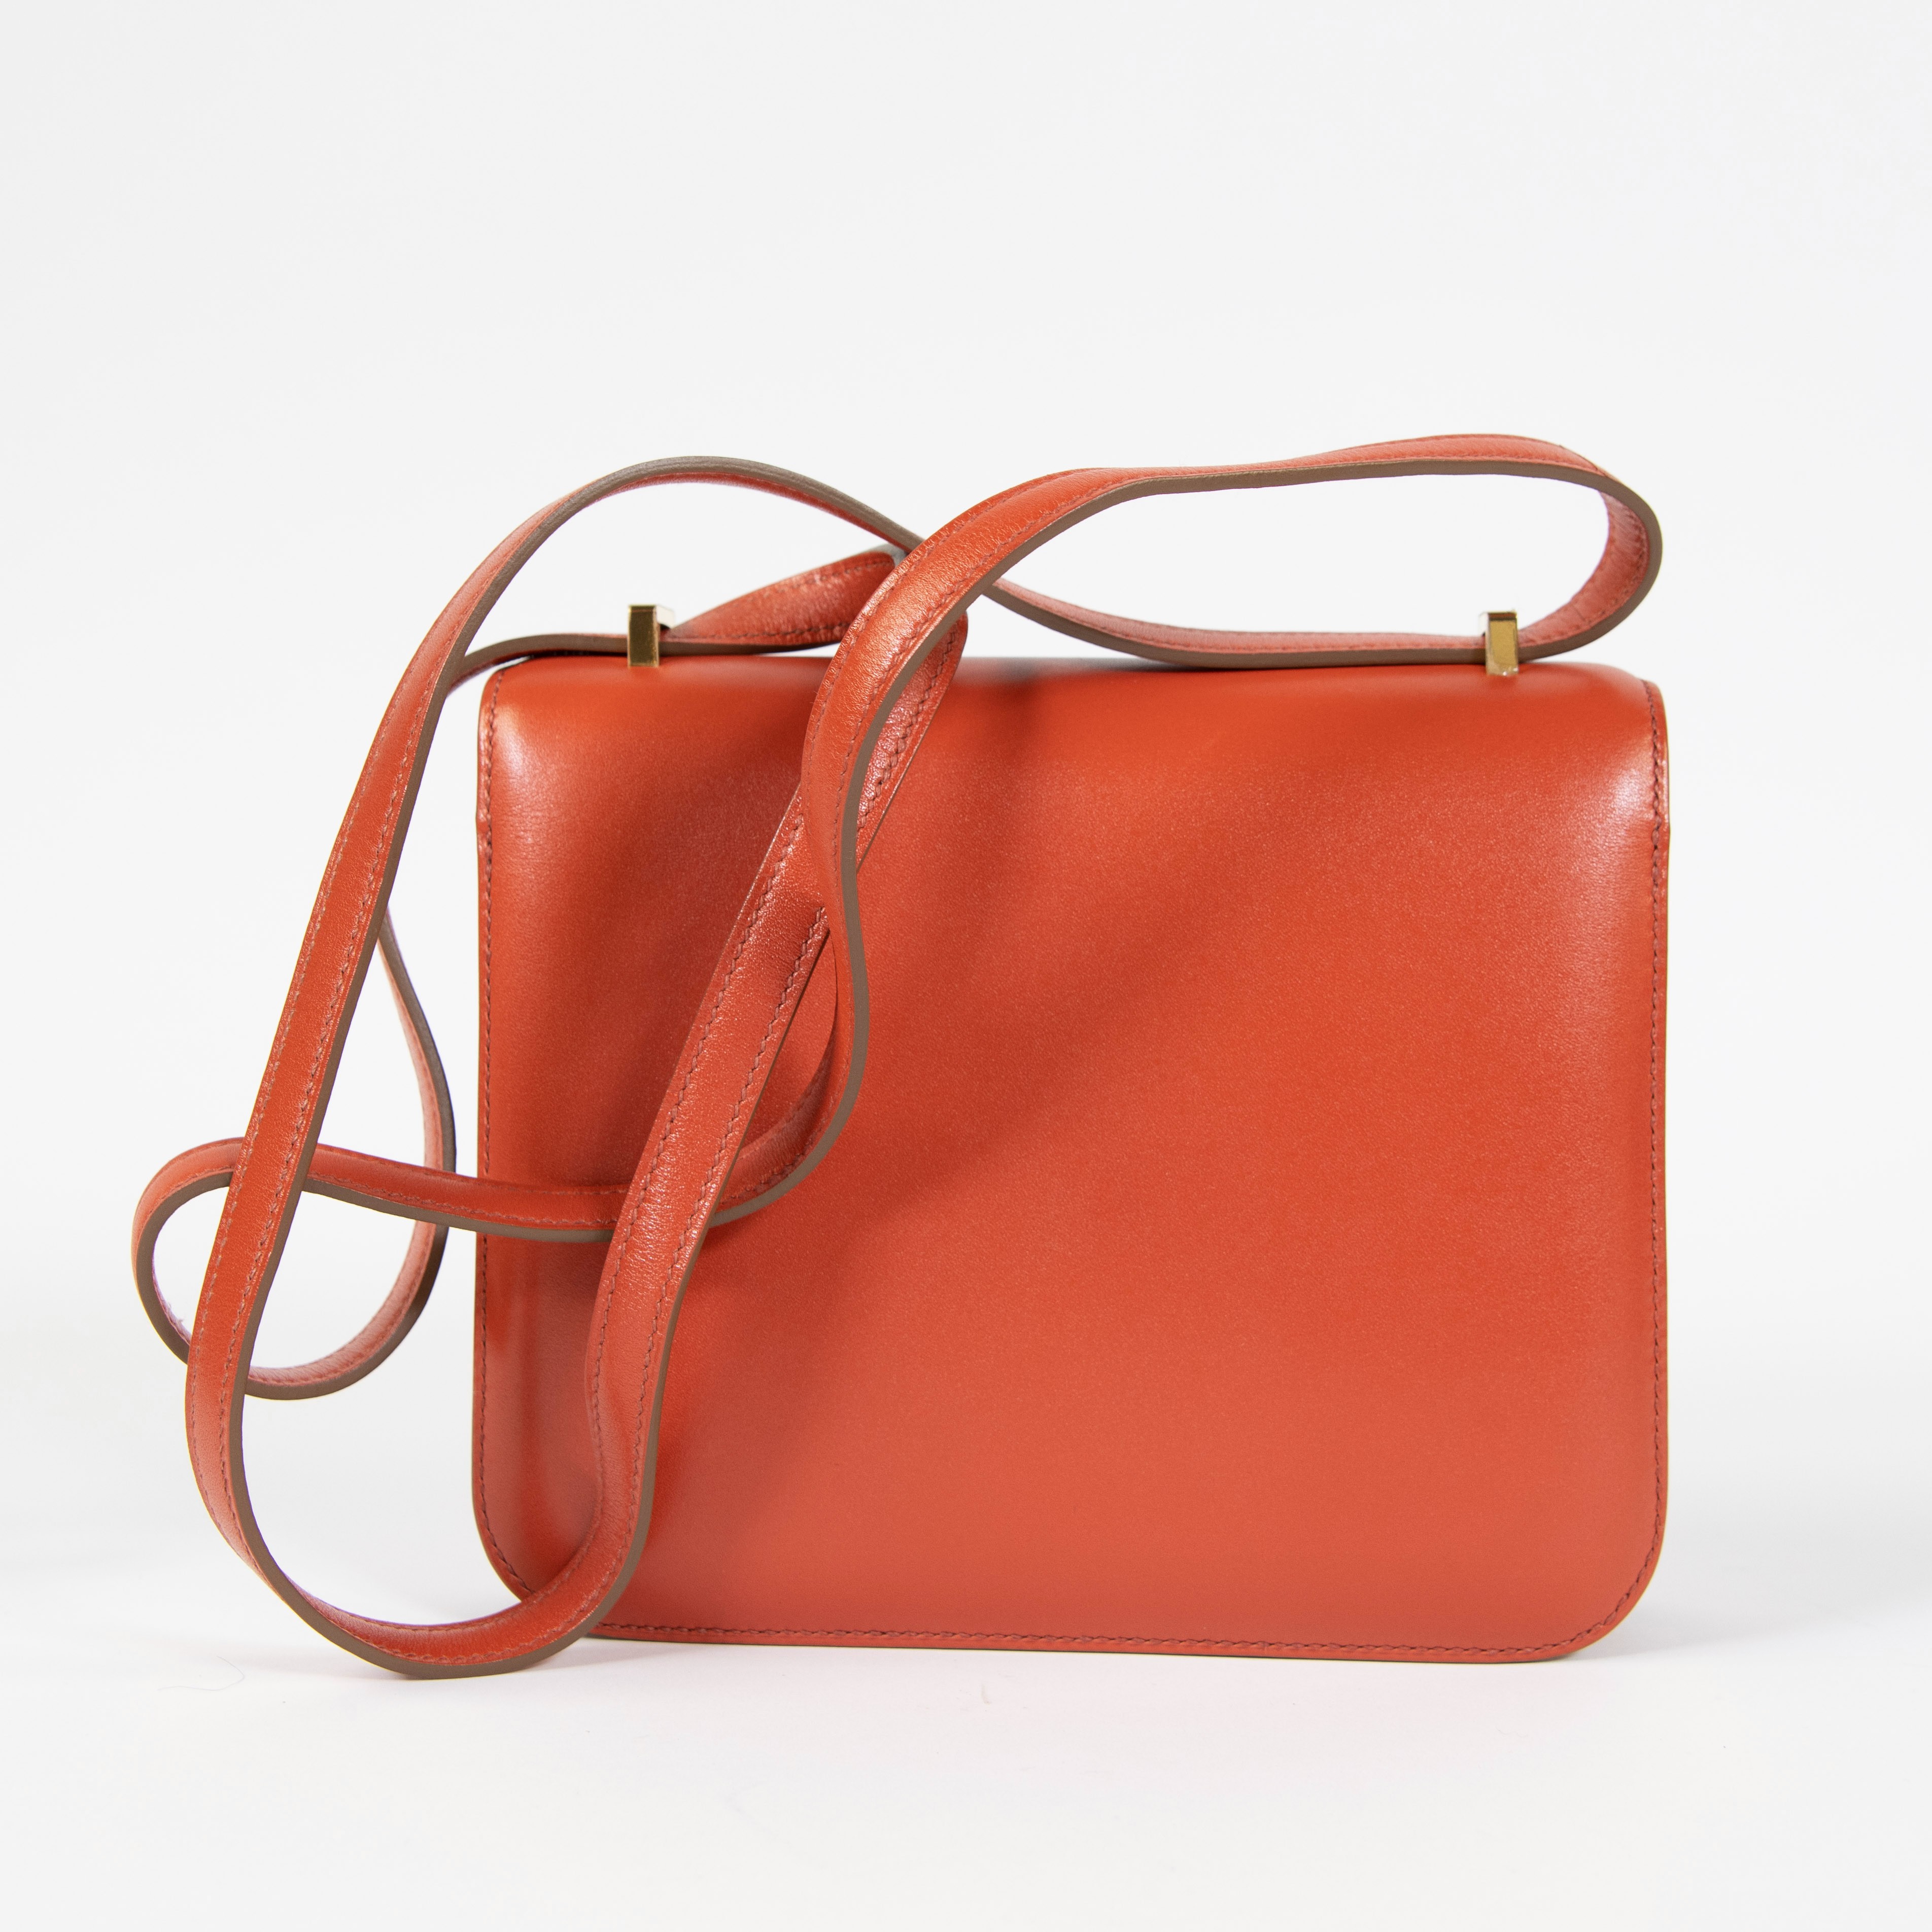 Hermes leather handback model Constance coral color with original bag and box - Image 5 of 9